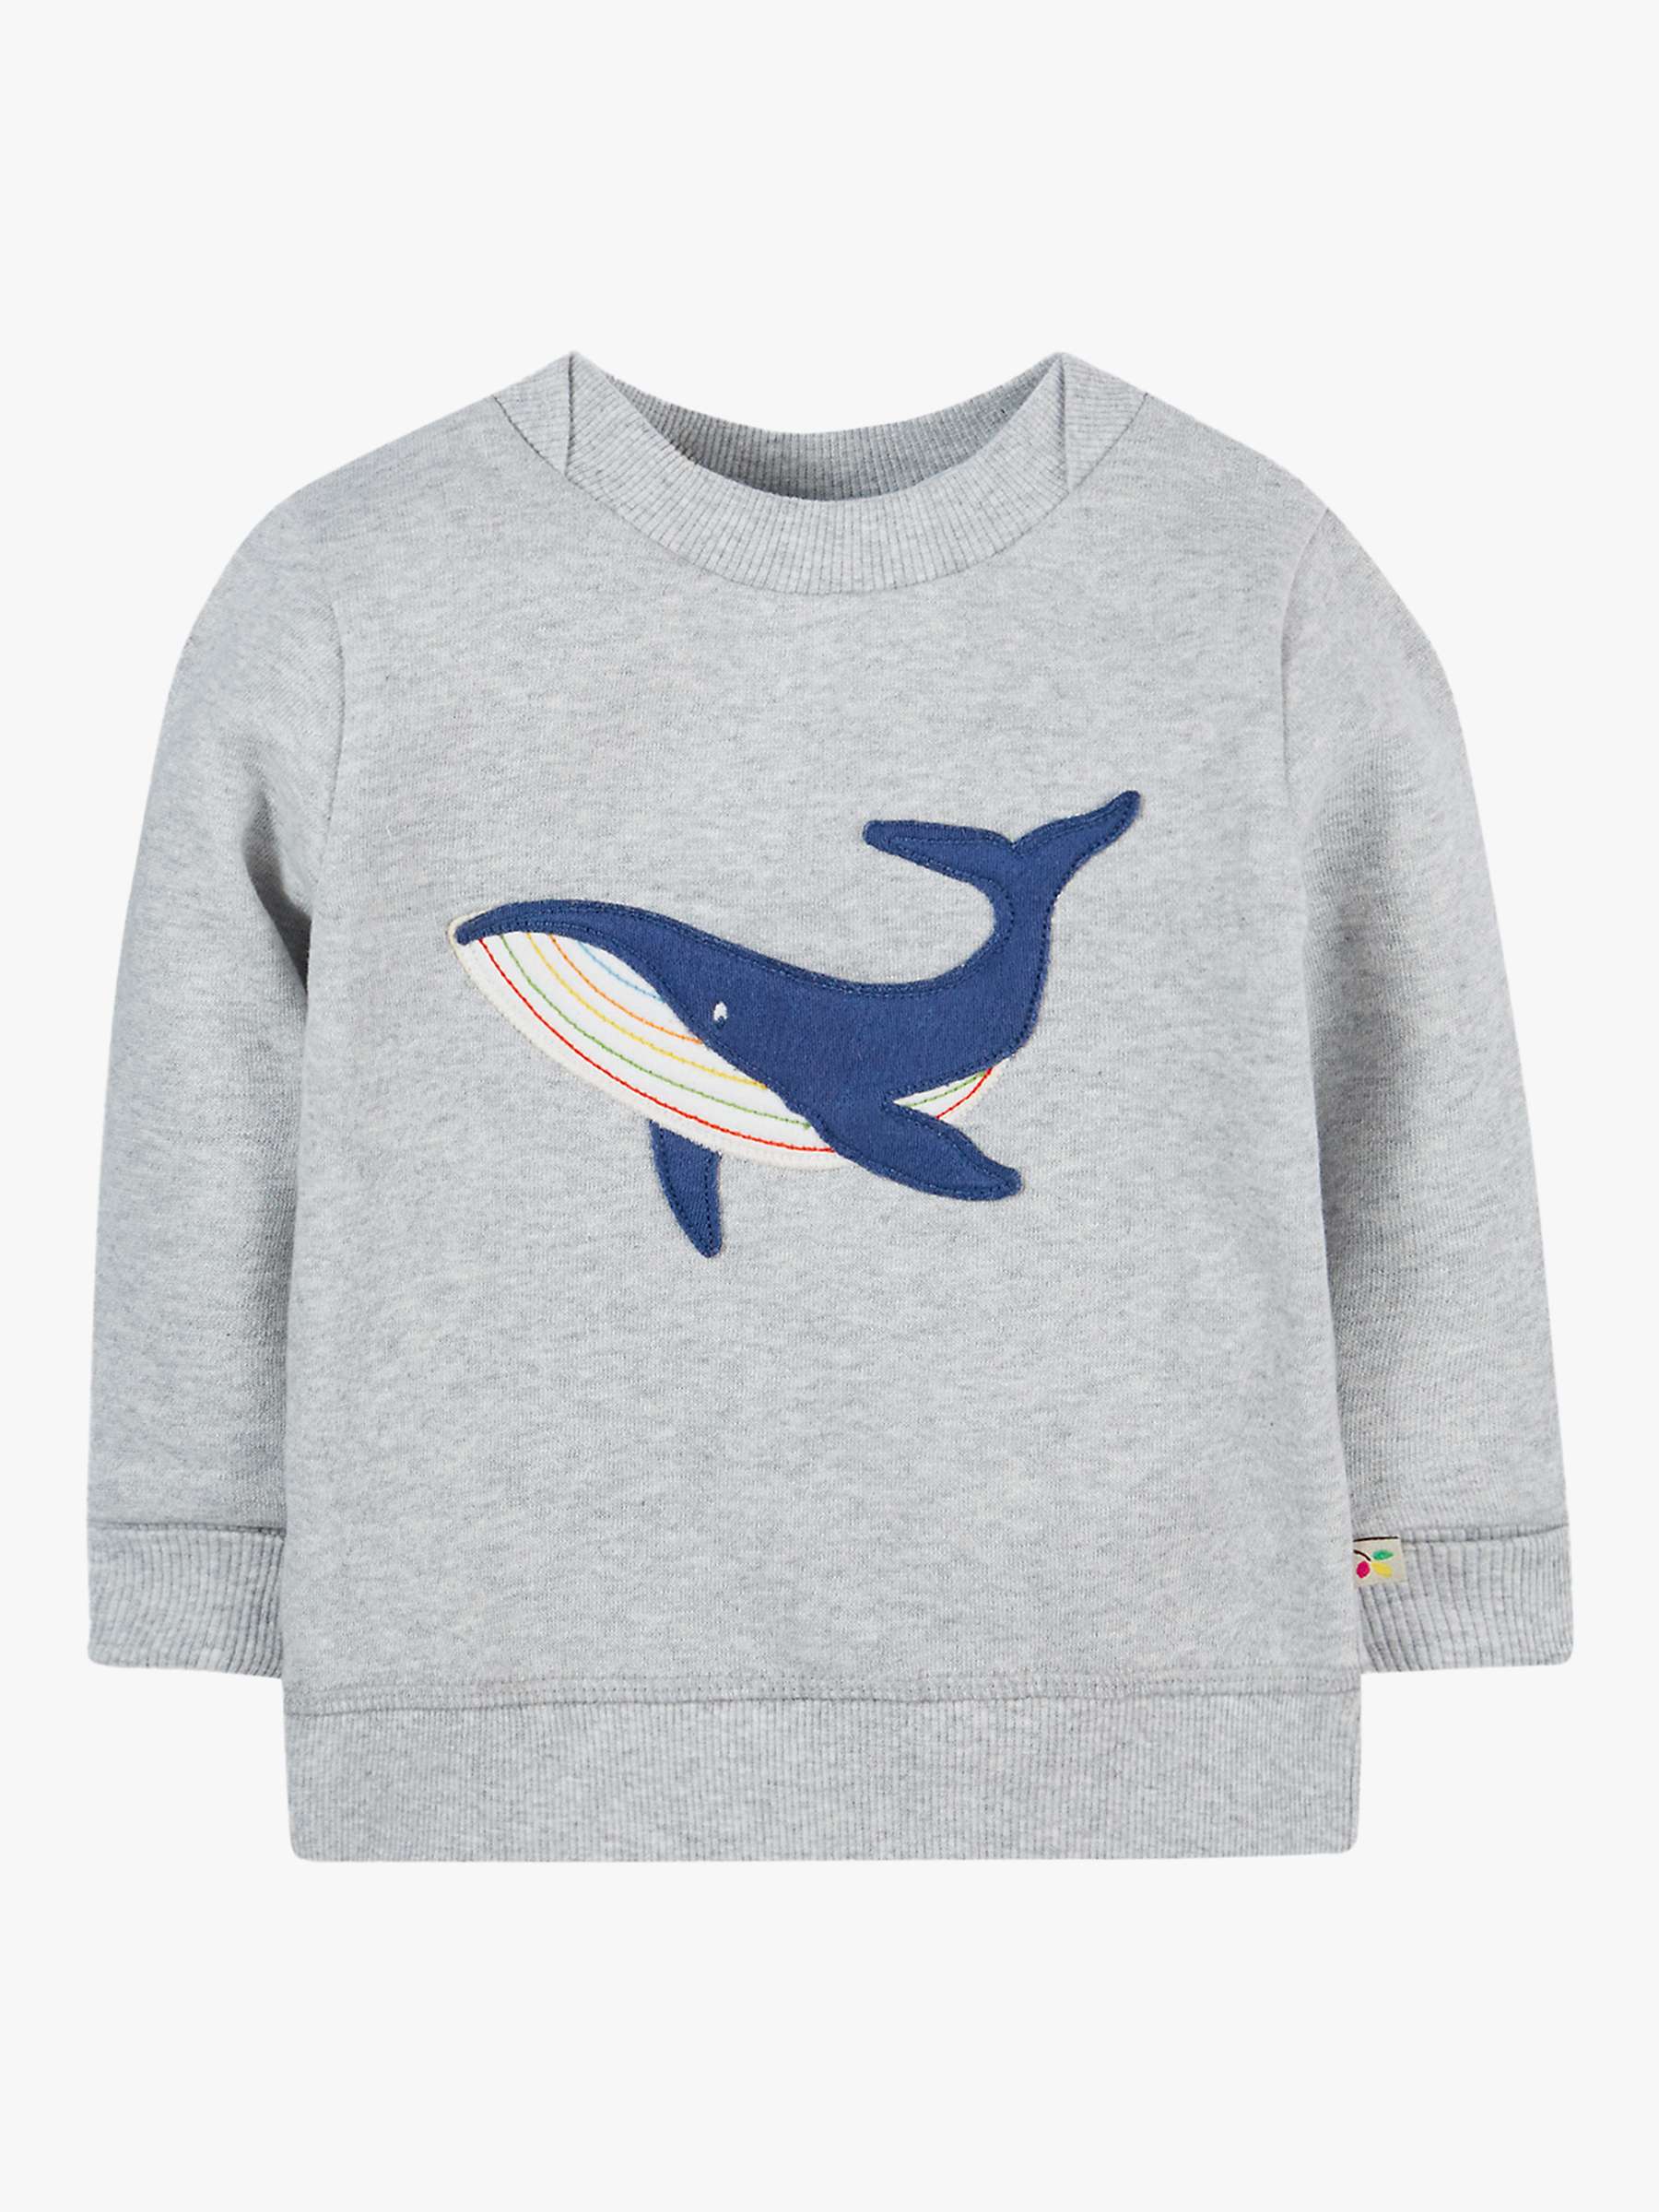 Buy Frugi Baby Whale Organic Cotton Switch Easy On Jumper, Grey Marl Online at johnlewis.com